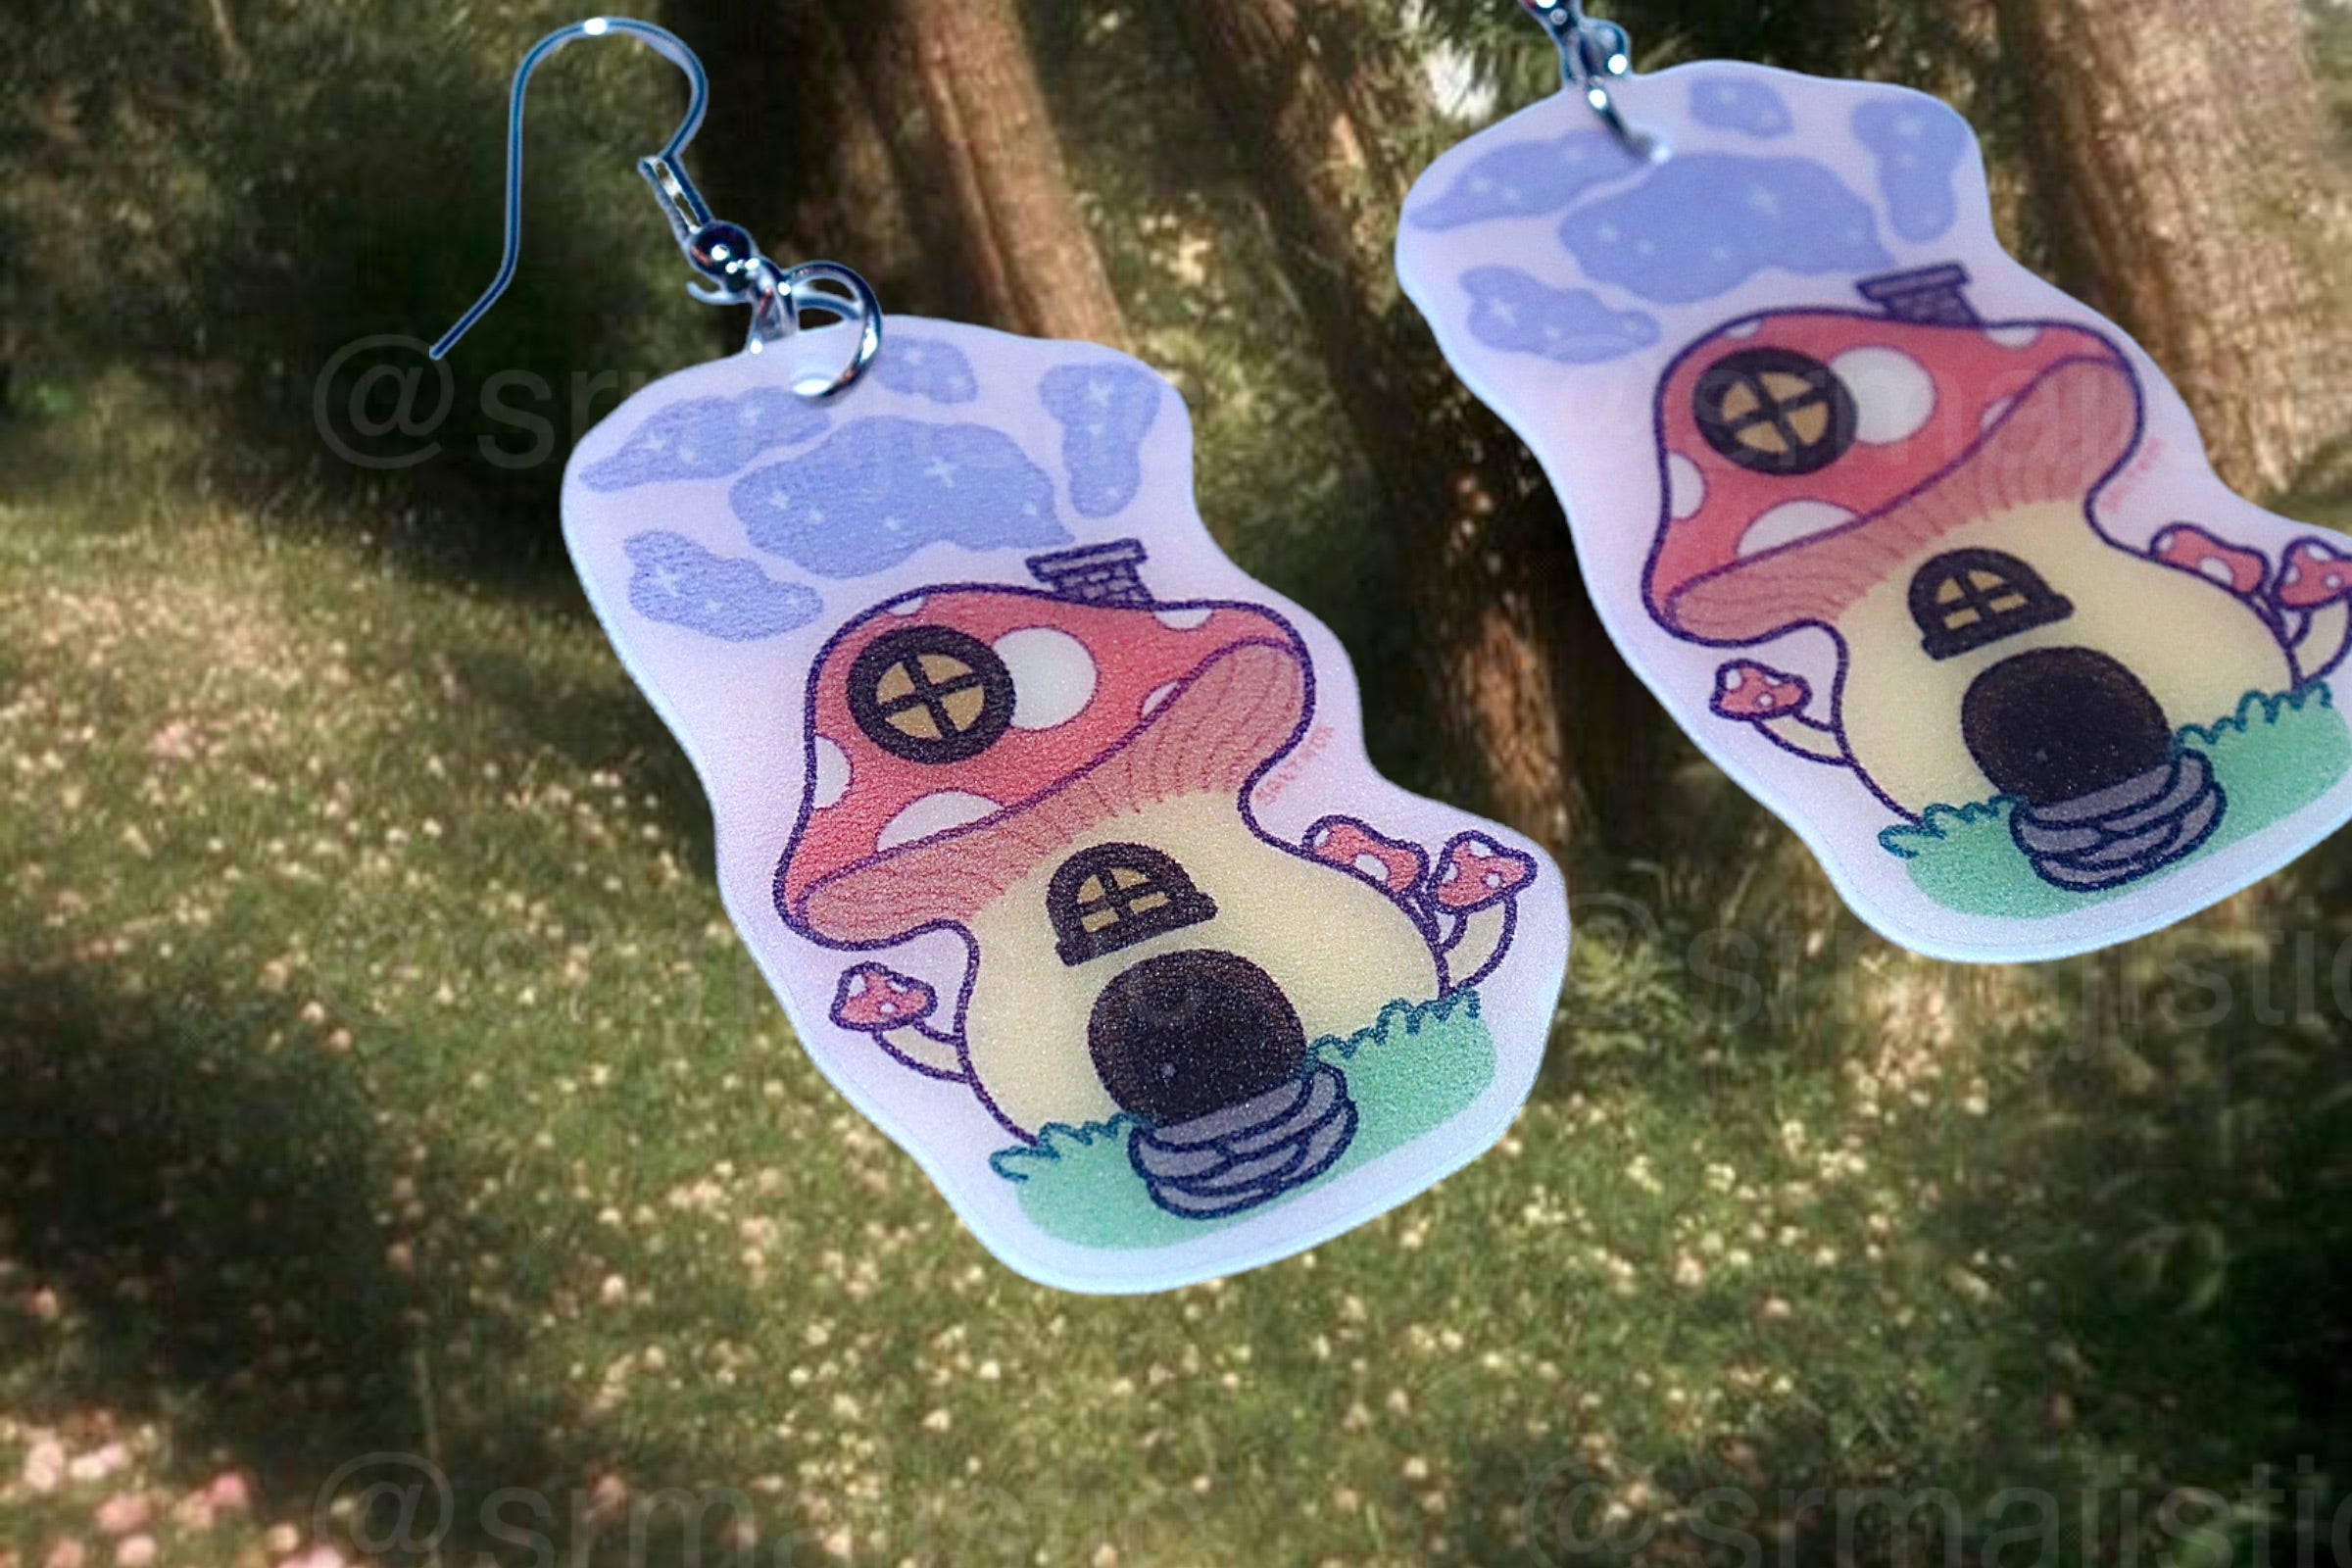 (READY TO SHIP) Cute Cottagecore Forest Themed Handmade Earrings (collaboration with @saltnox)